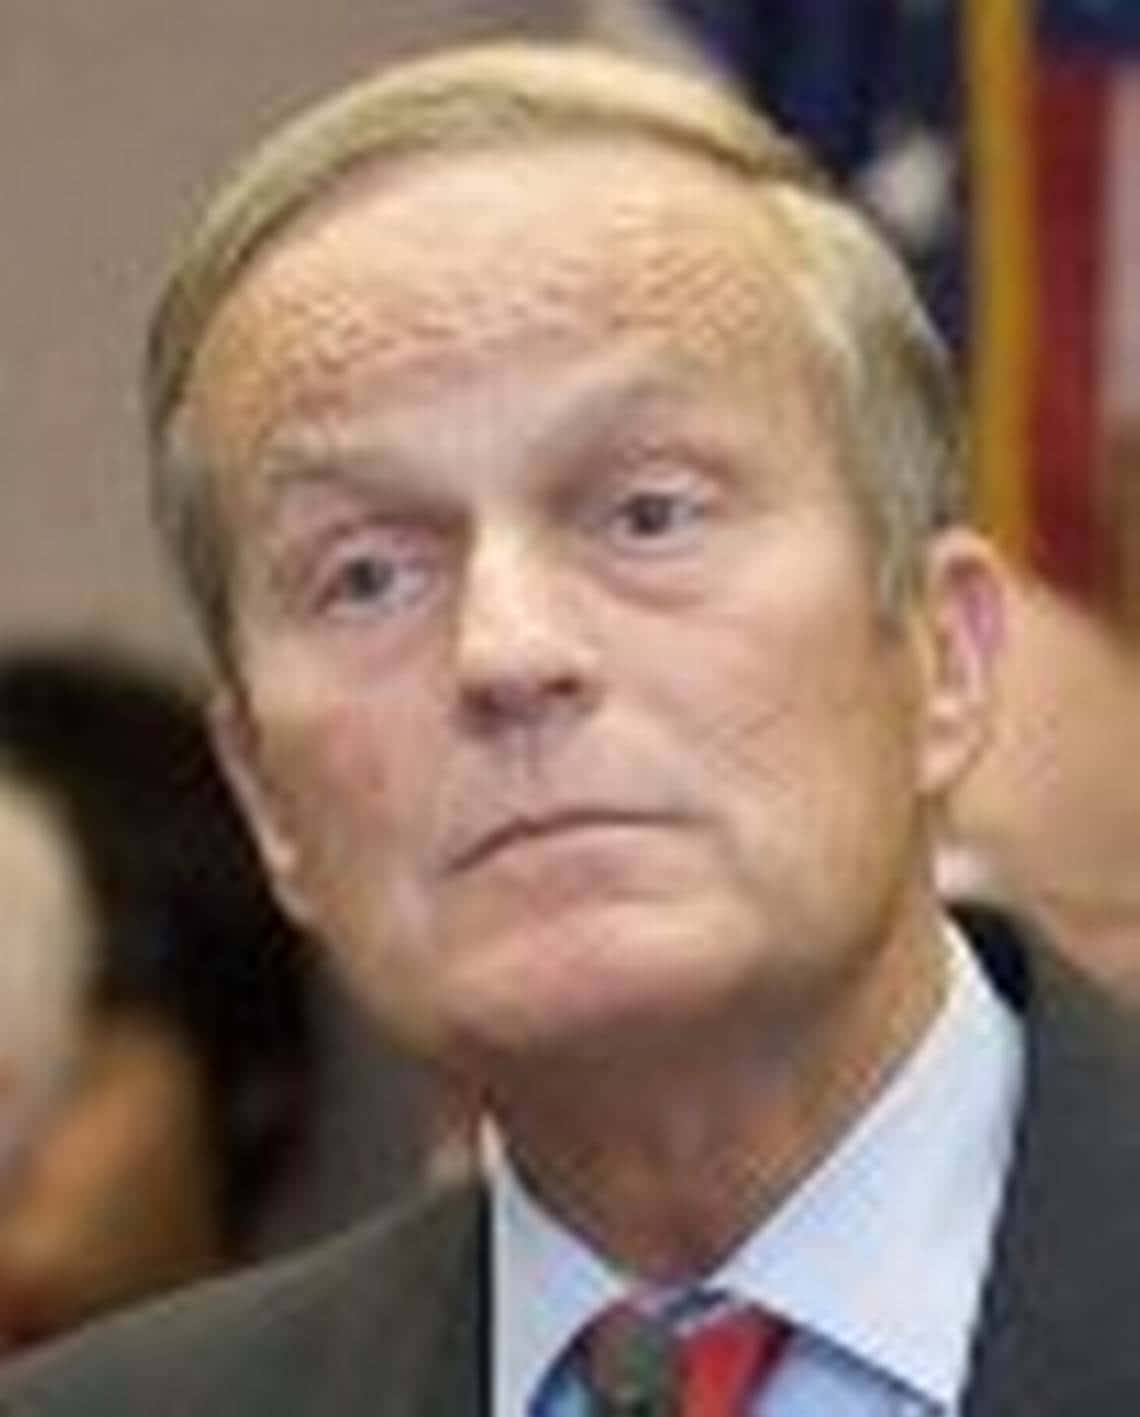 Thoughtful Todd Akin in Close-up View Wallpaper